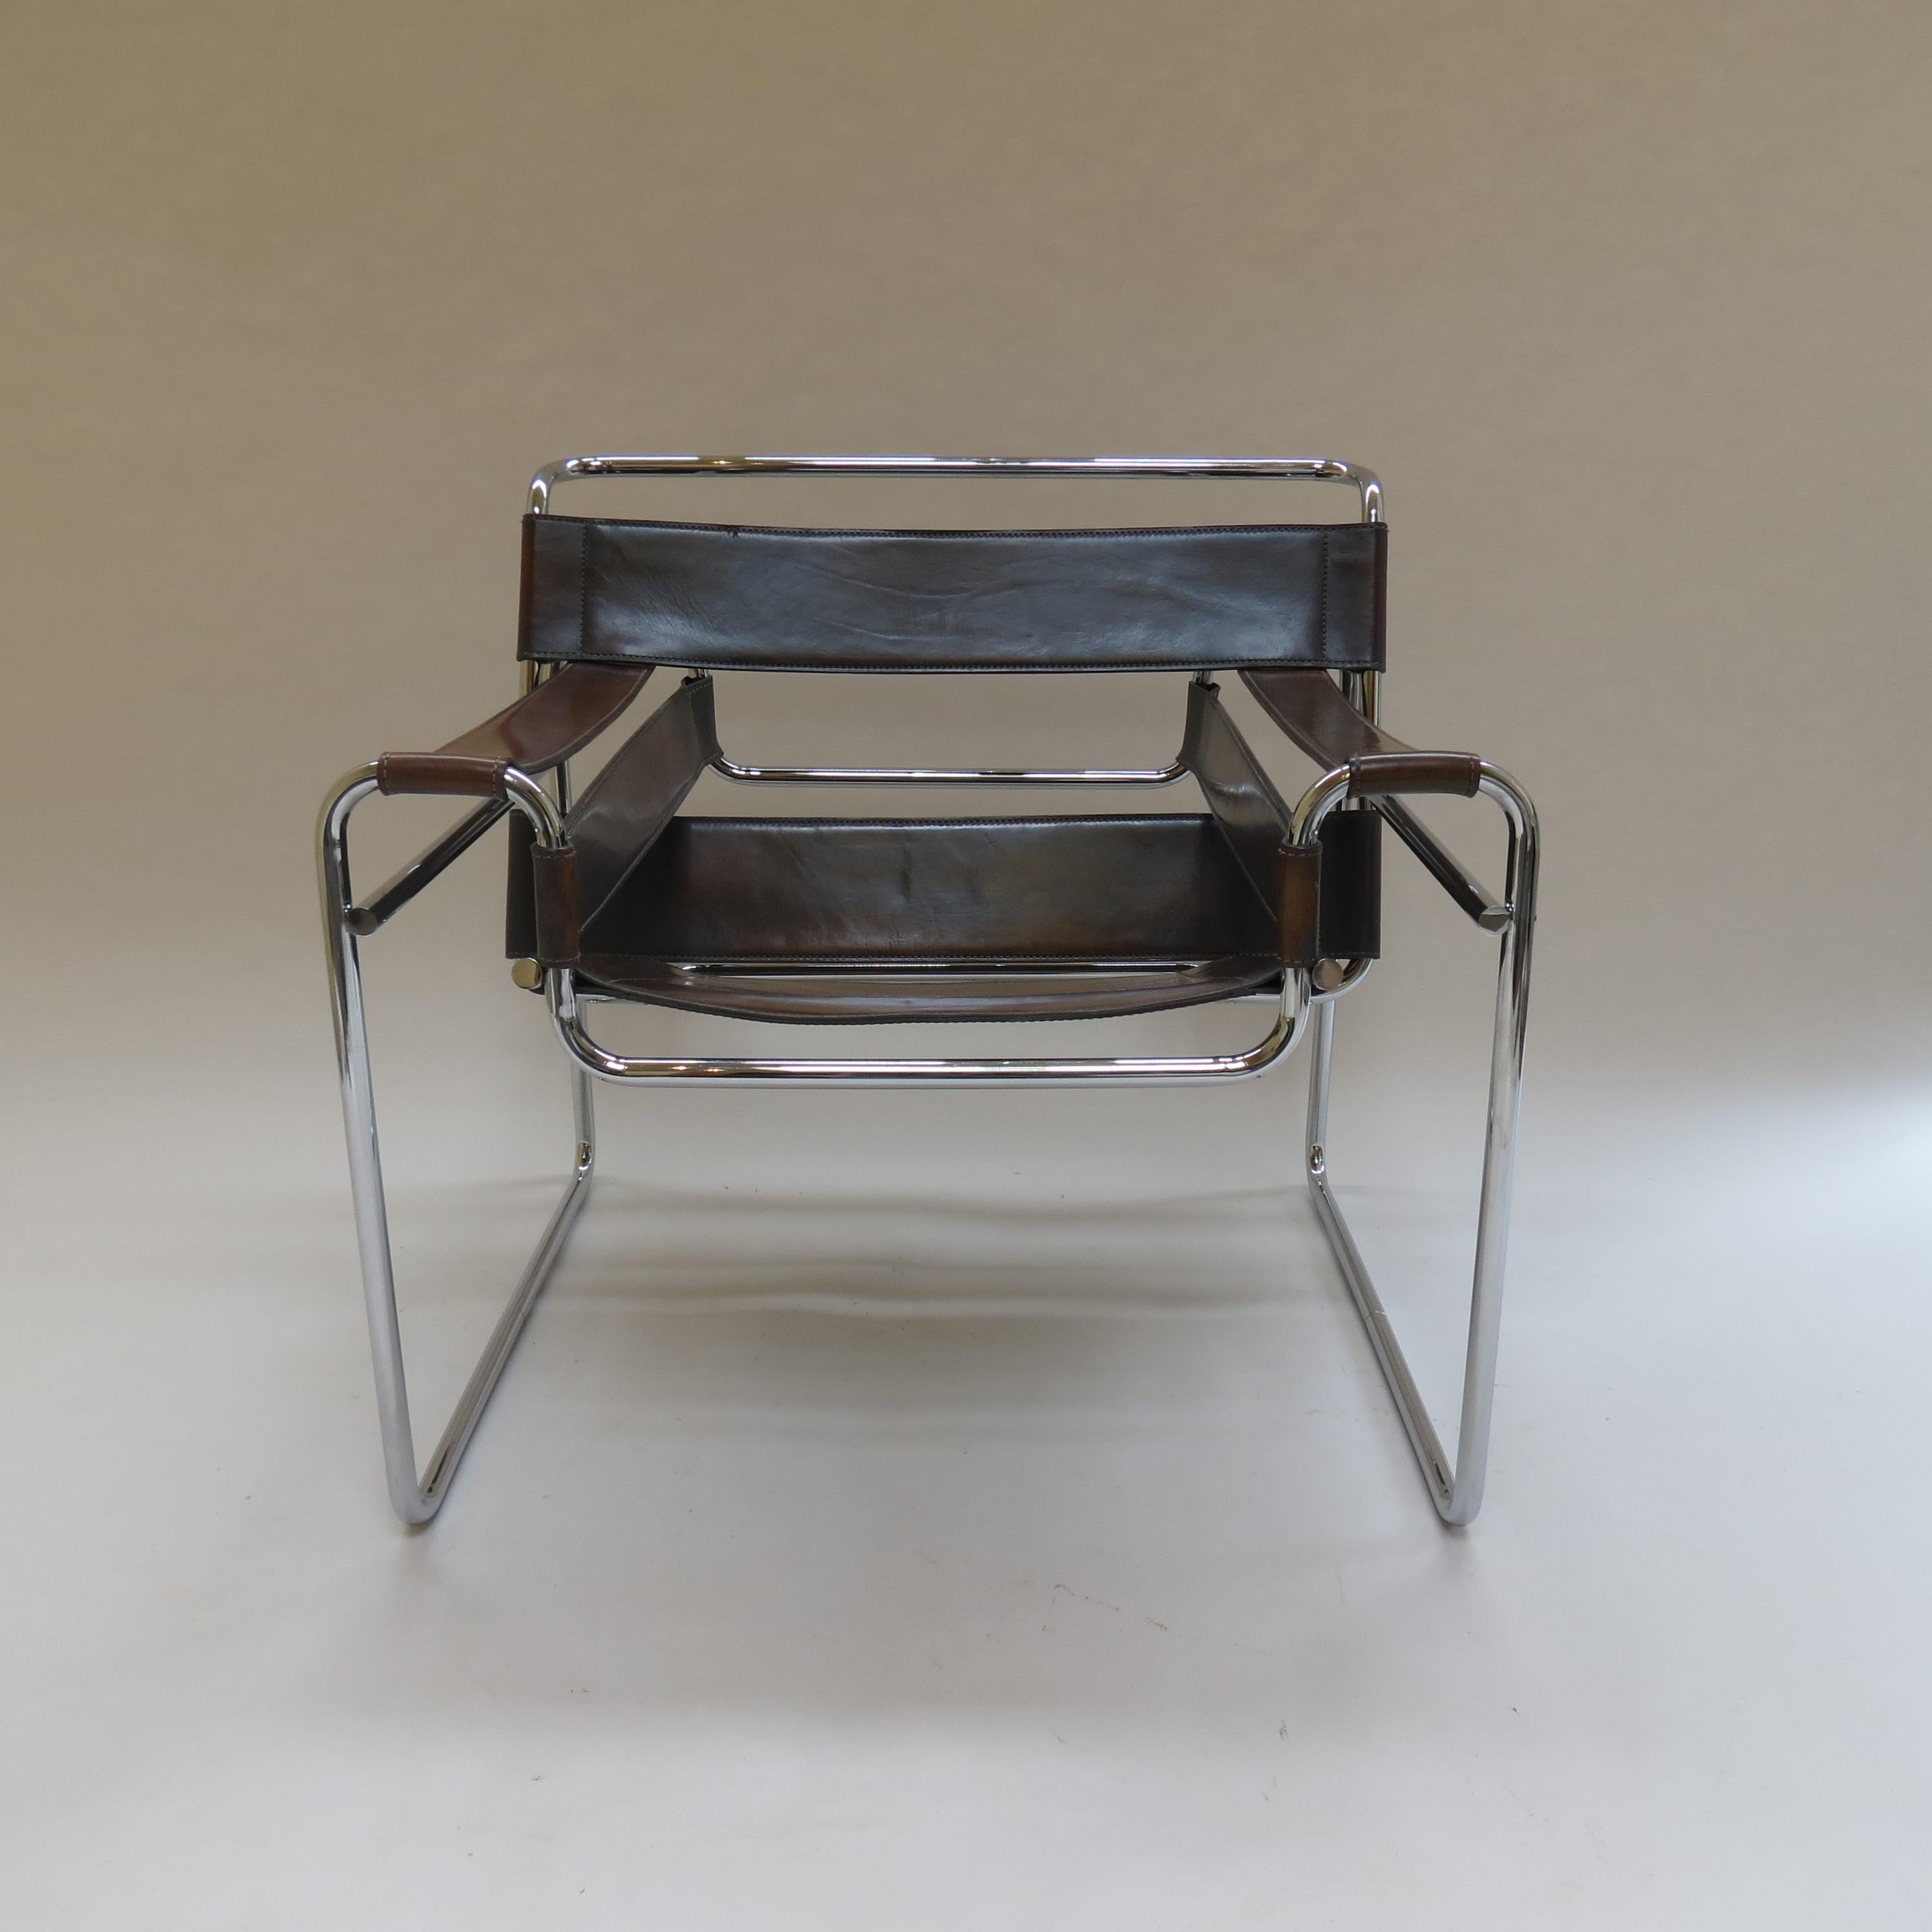 A Wassily chair designed by Marcel Breuer and manufactured by Knoll. The original year of design of this chair was 1925, this particular chair was manufactured in the early 1980s.
Made from polished chrome tube with leather seat and arms. The chair